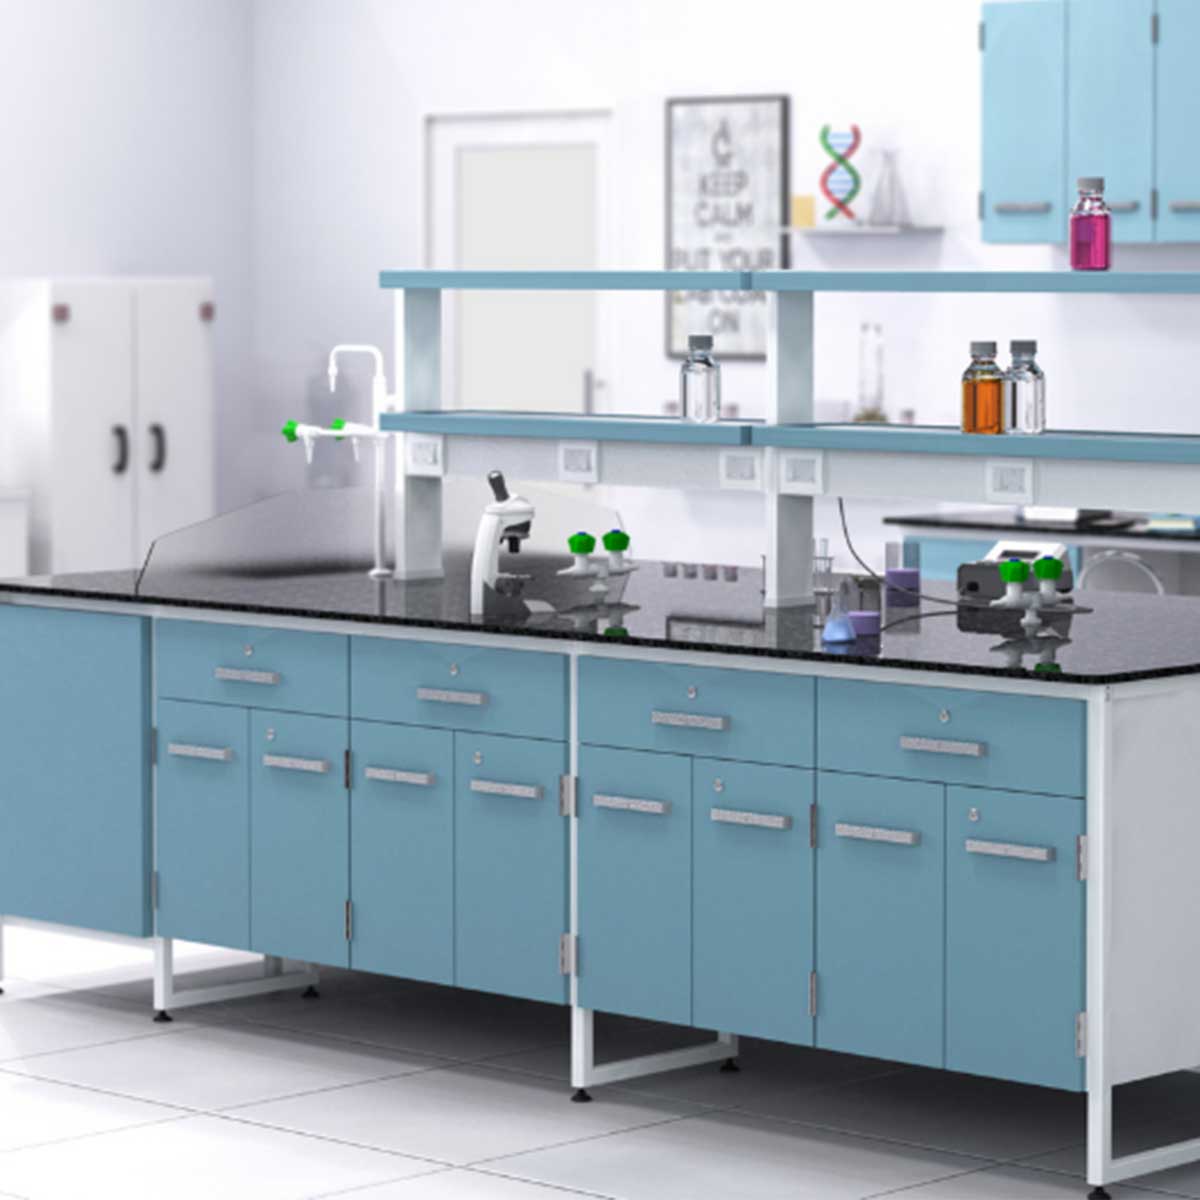 Laboratory Workstation Manufacturers, Suppliers in South Extension Part 1